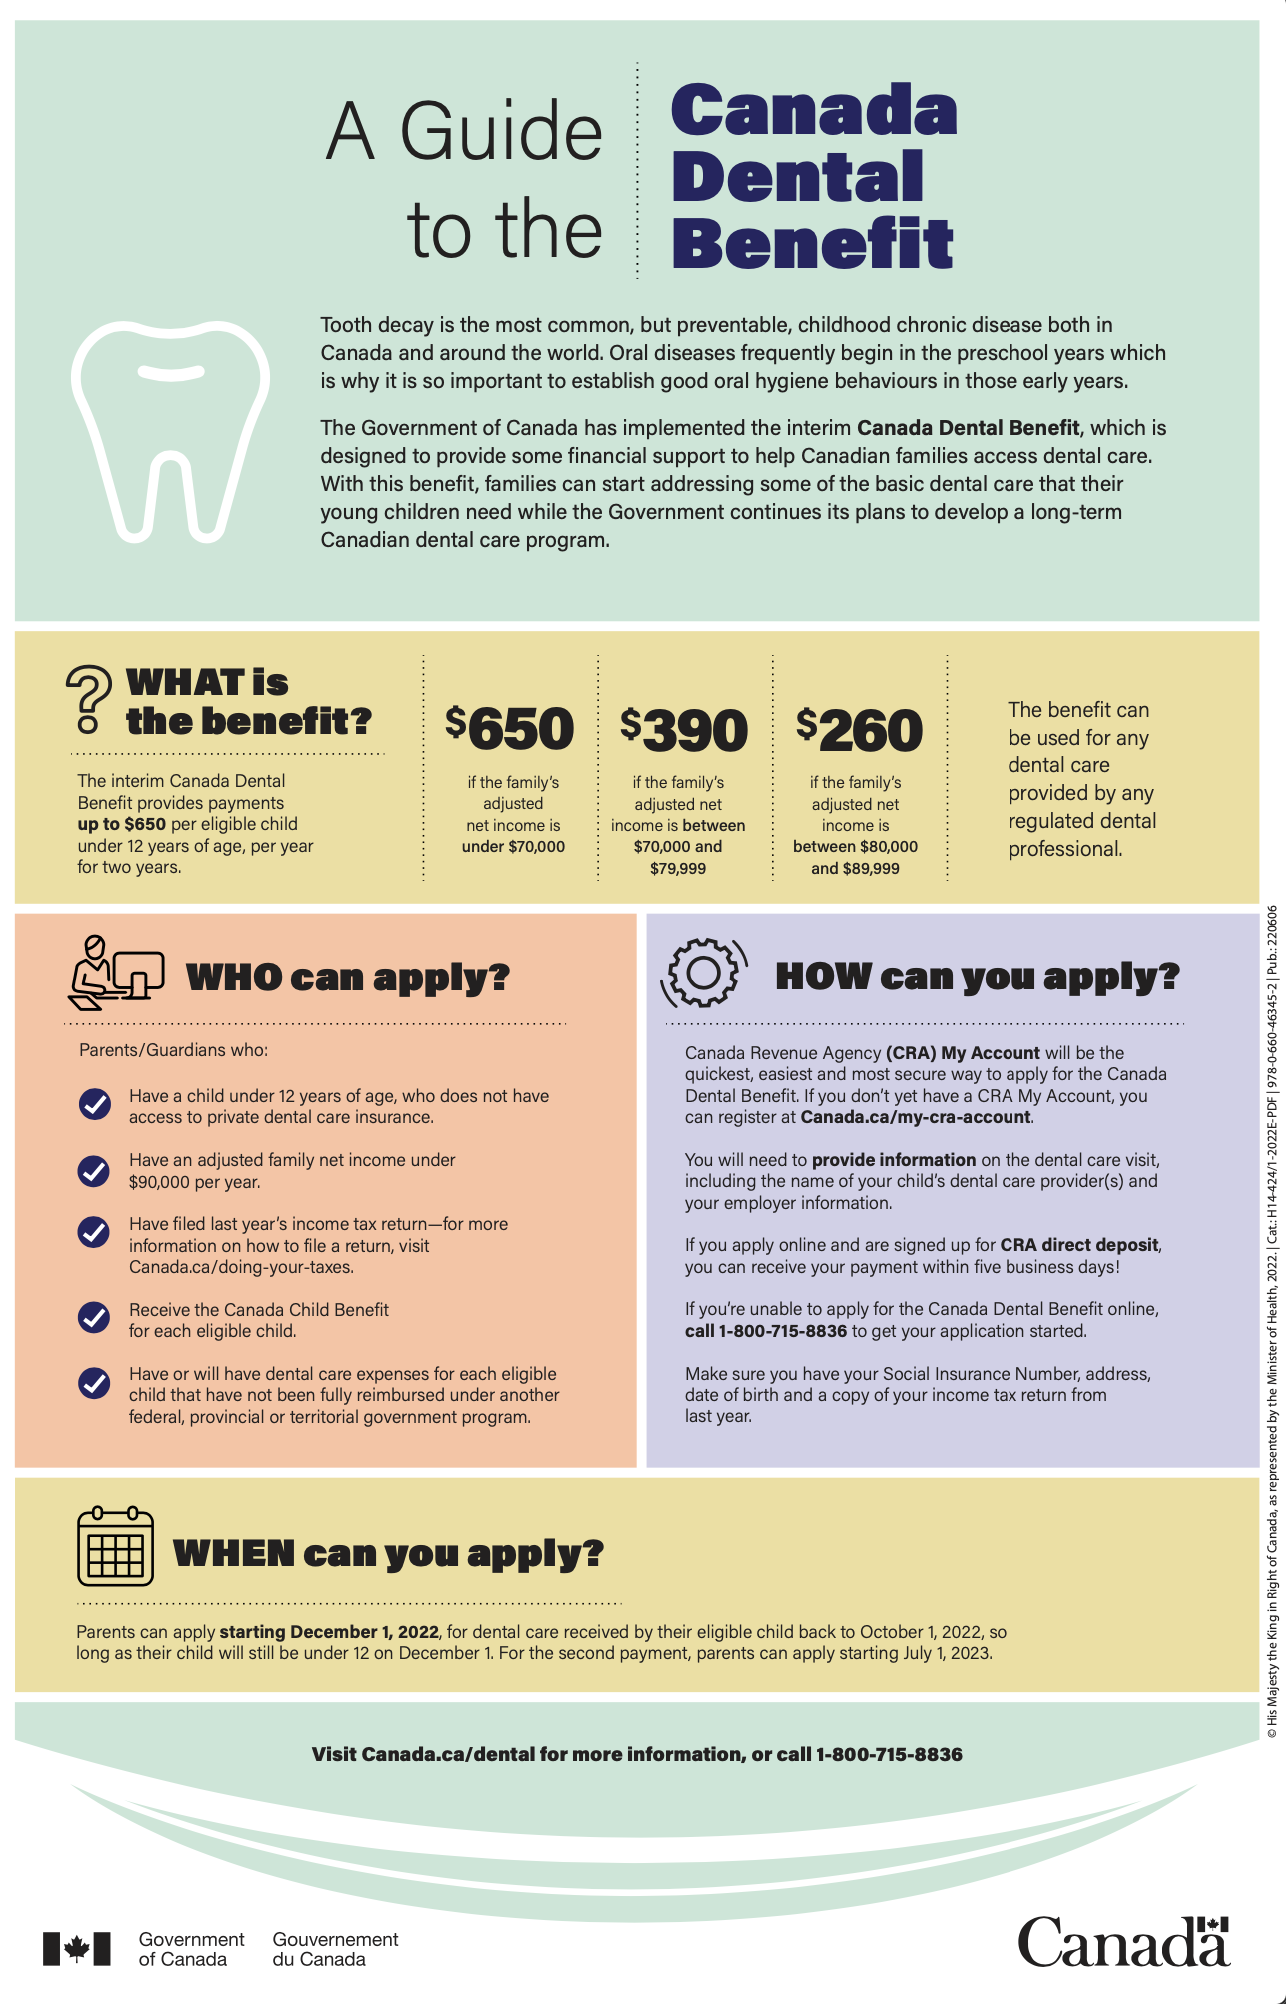 [2022] Free Dental Care in Canada: The Complete Guide